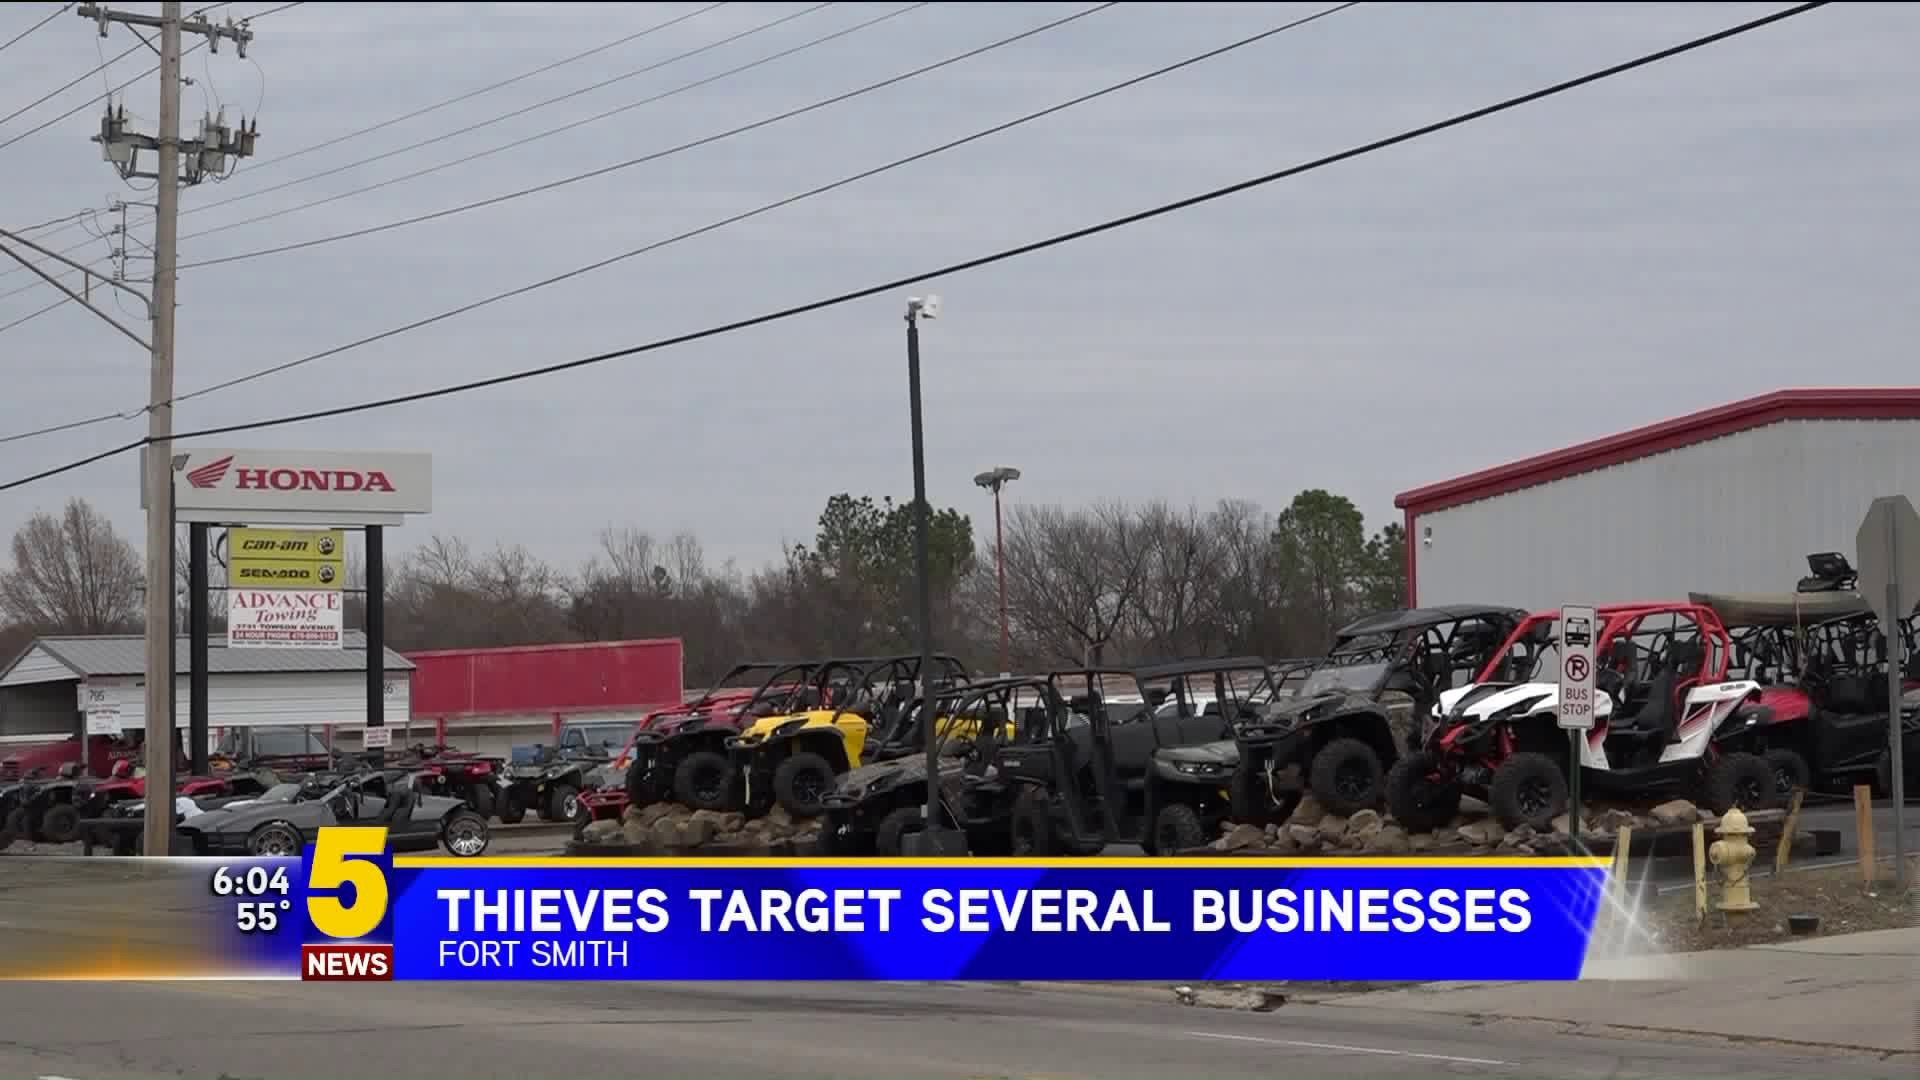 Thieves Target Several Businesses